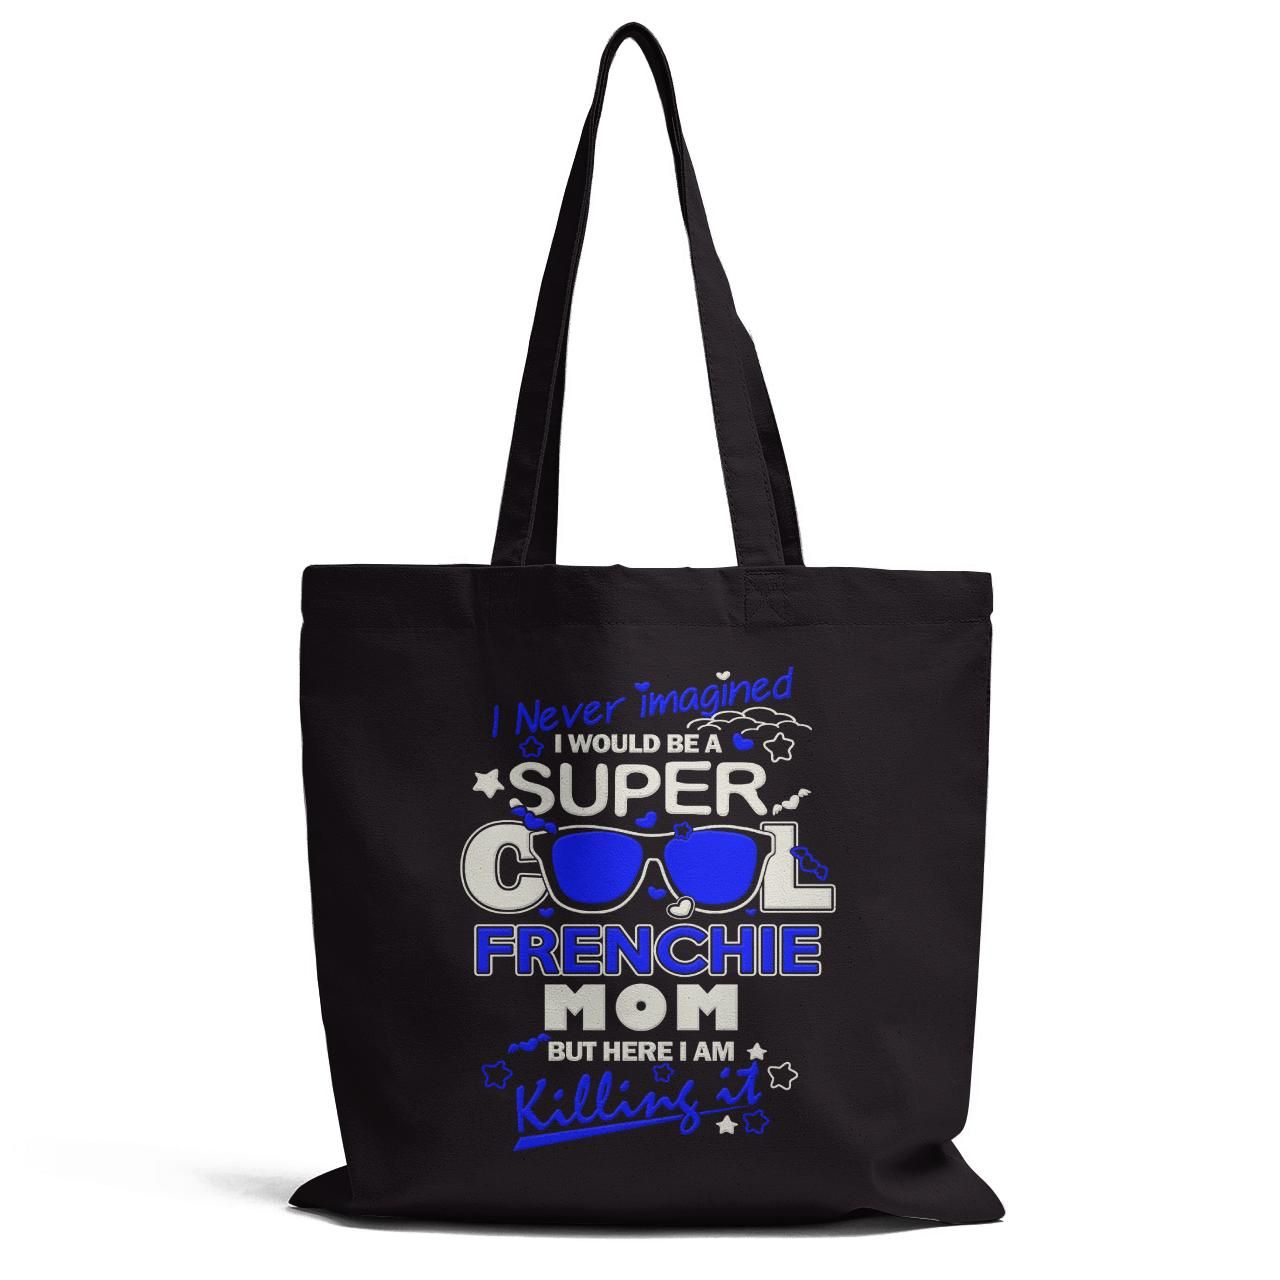 I Never Imagined I Would Be A Super Cool Frenchie Mom Tote Bag